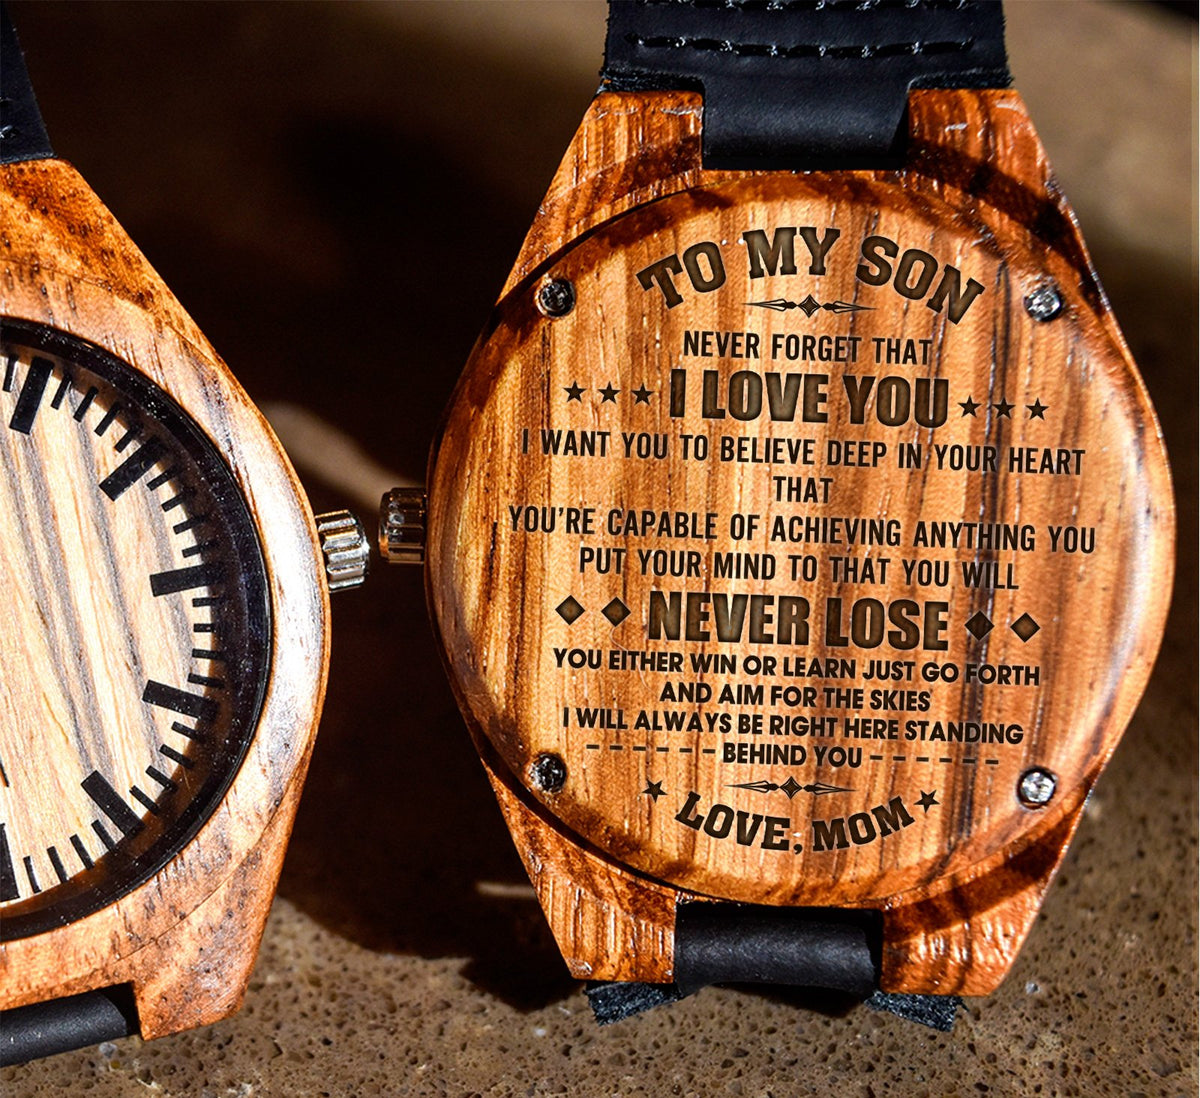 To My Son - I Will Always be Right Here Standing Behind You - Wooden Watch